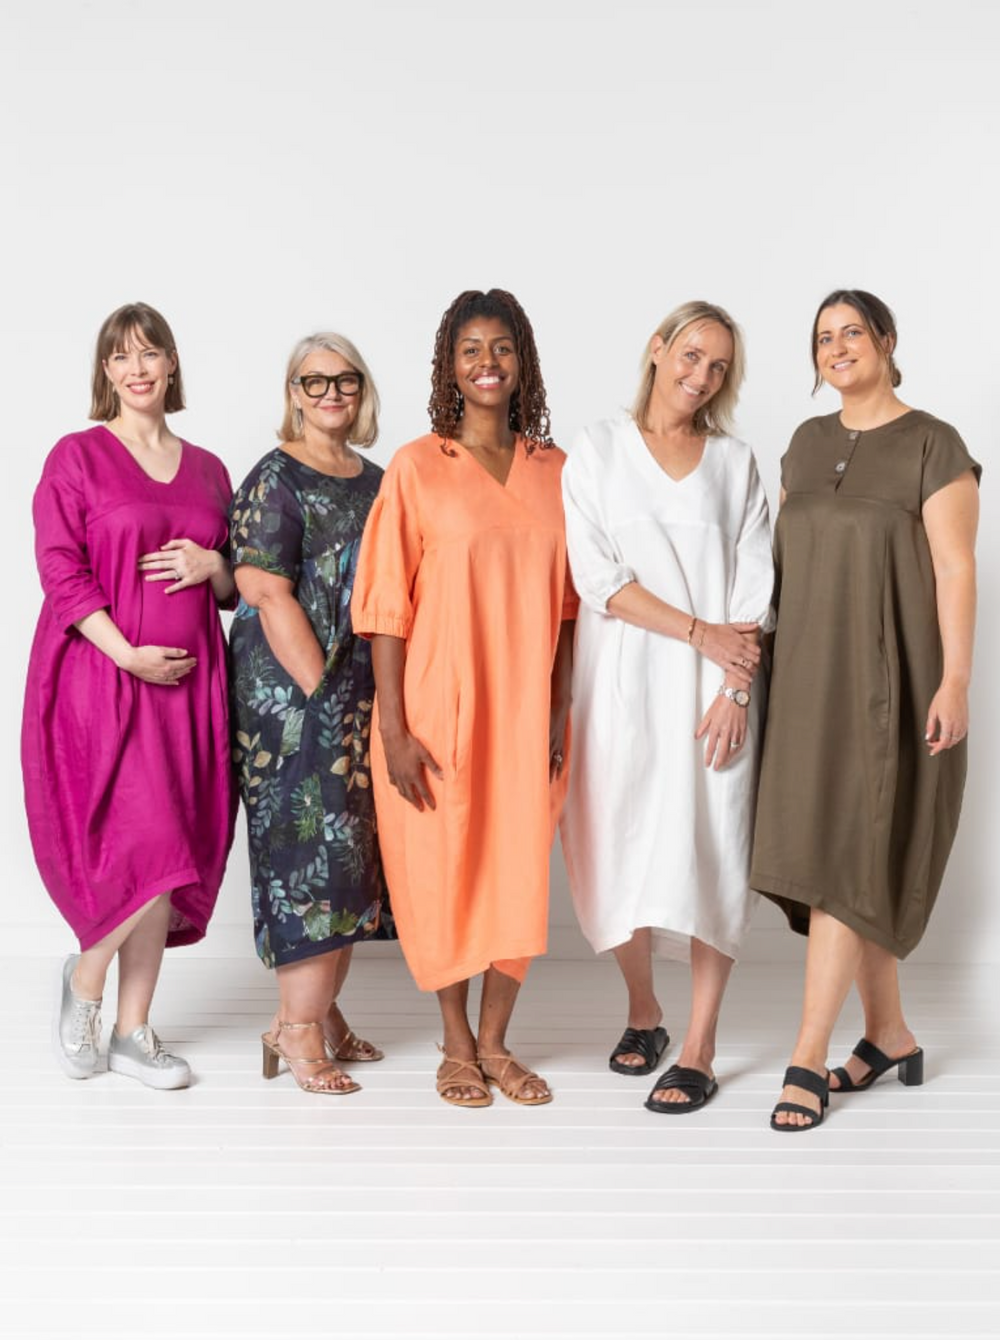 Women wearing the Sydney Dress Extension Pack sewing pattern from Style Arc on The Fold Line. A cocoon dress pattern made in washed linen, crepe, rayon, or lightweight wool fabric, featuring a round or V-neckline, short or mid length sleeves, and a midi length.